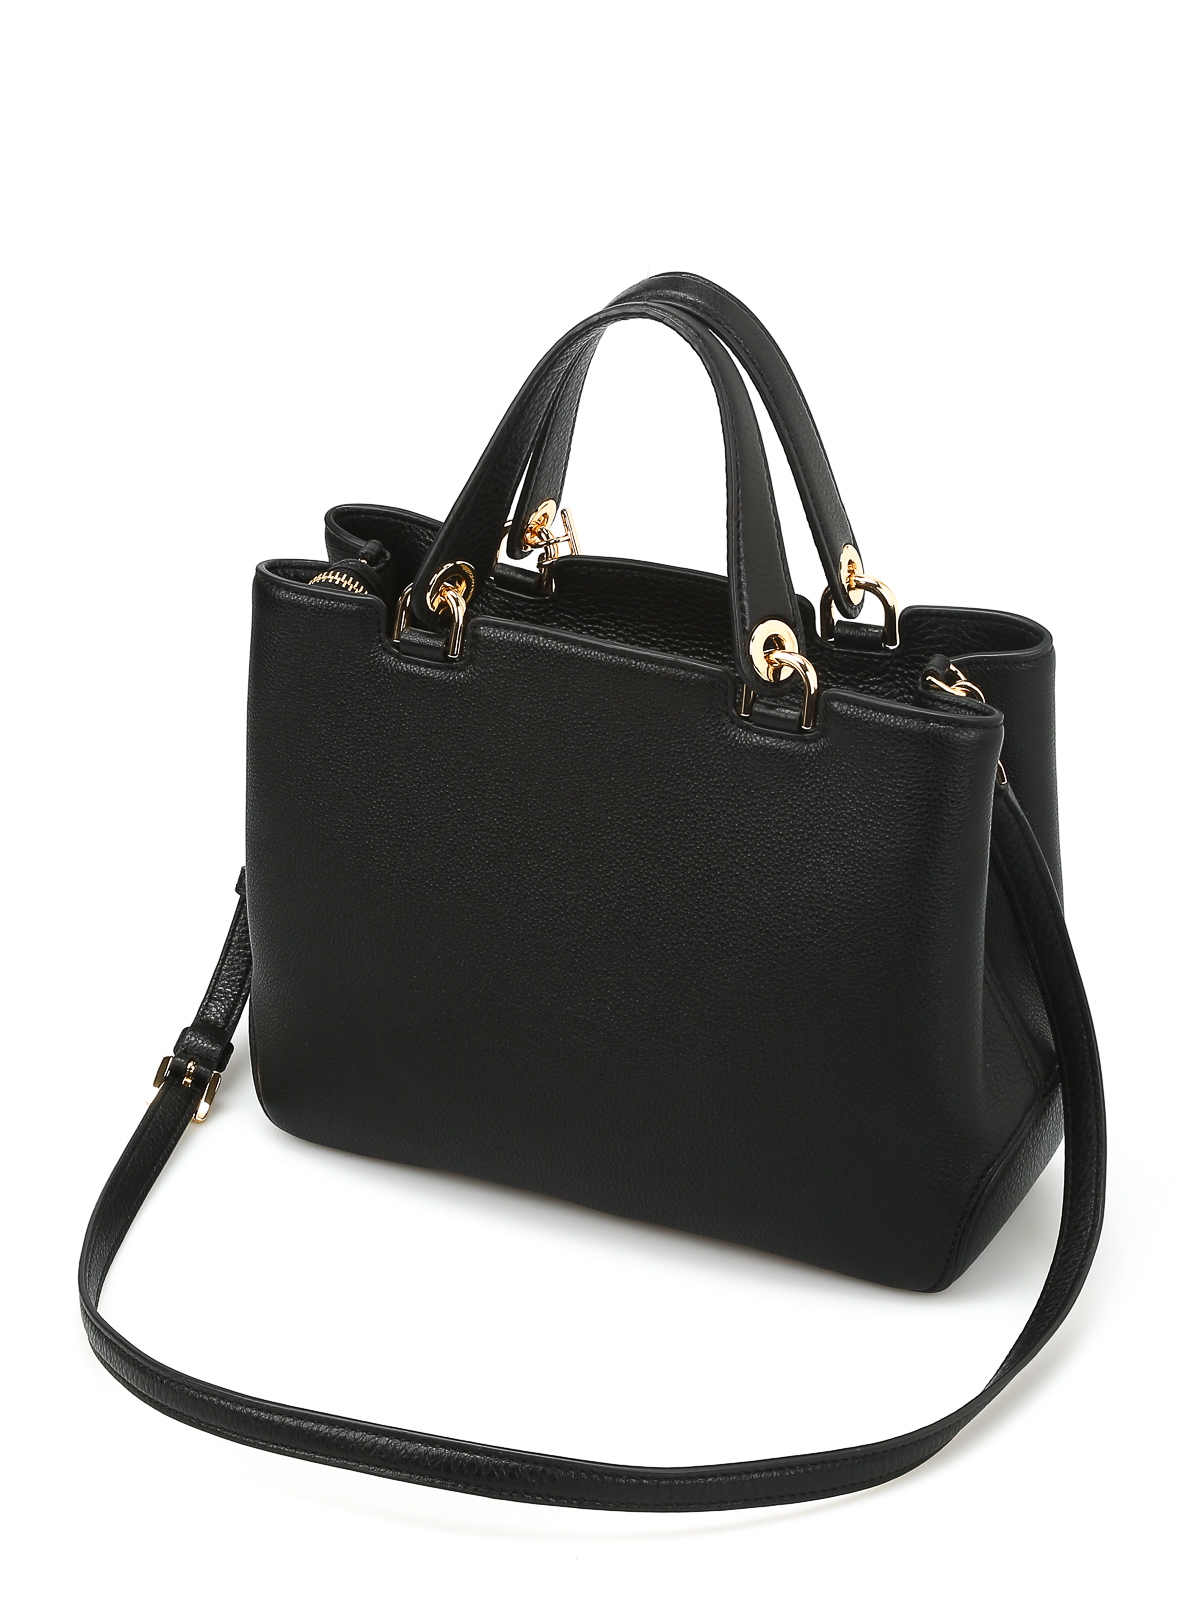 michael kors anabelle leather tote